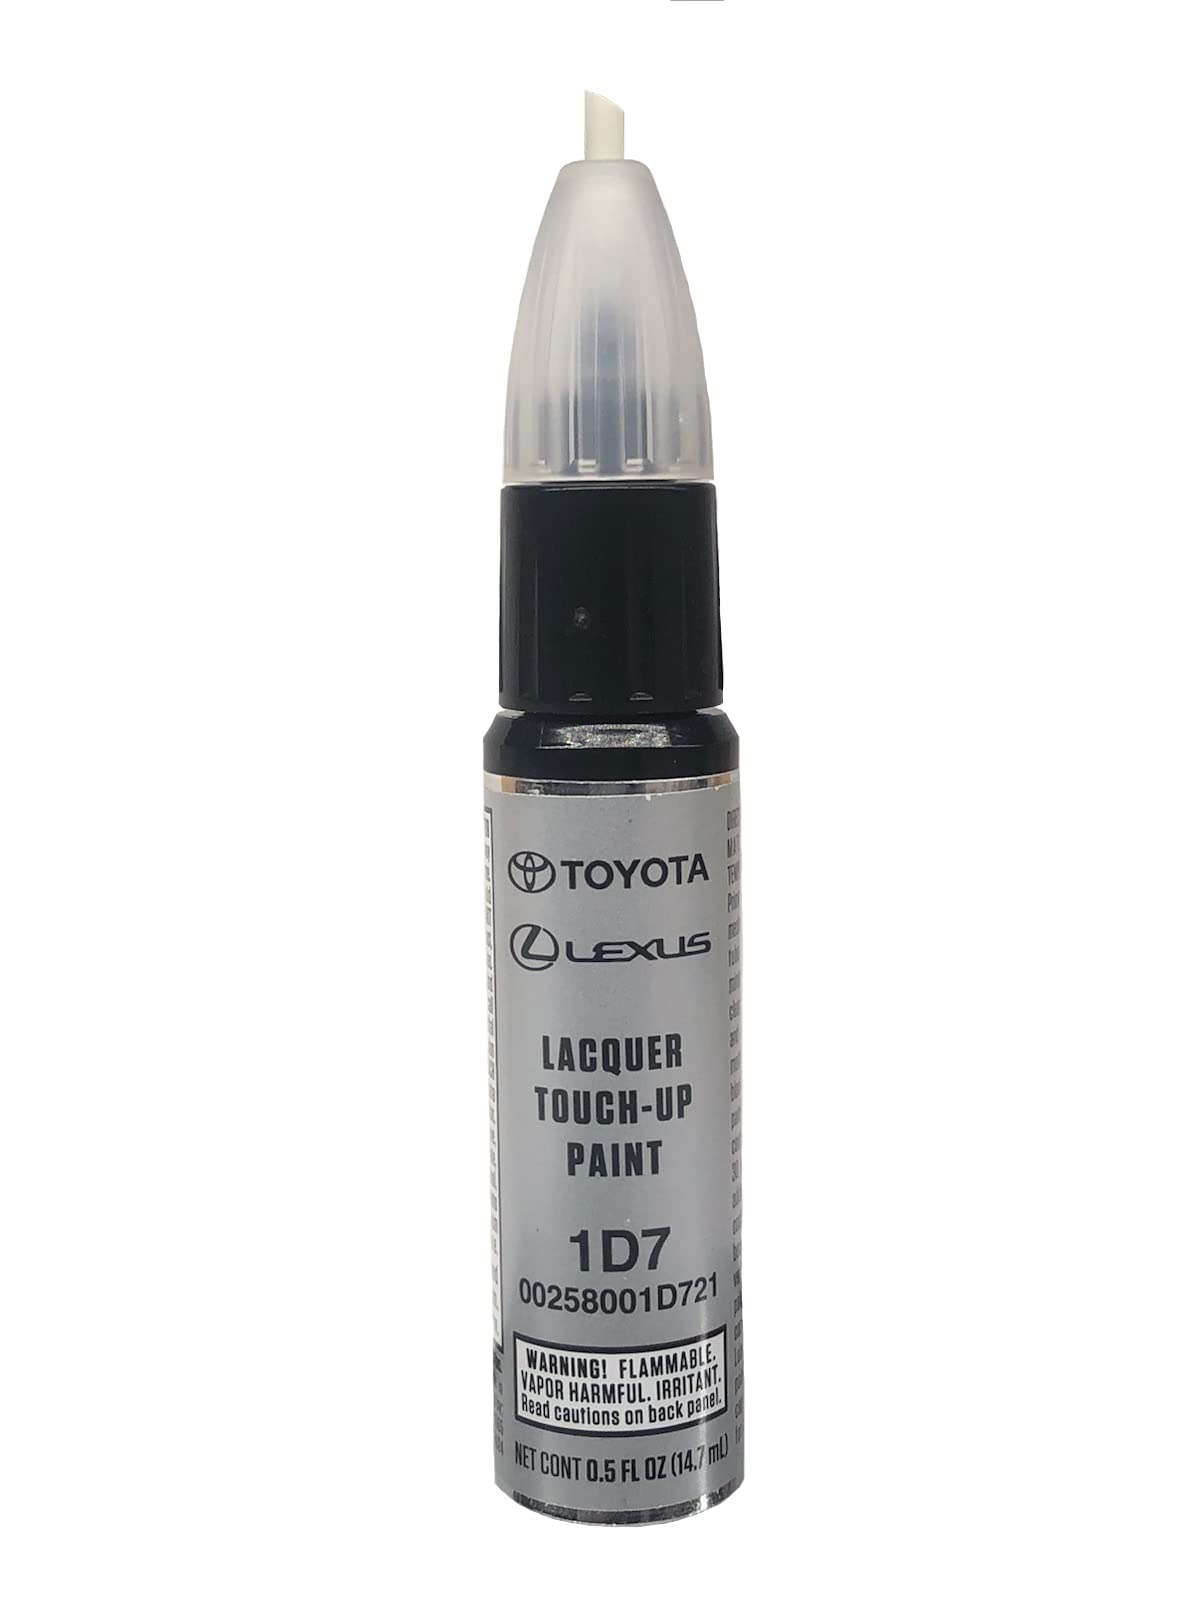 toyota touch up paint pen